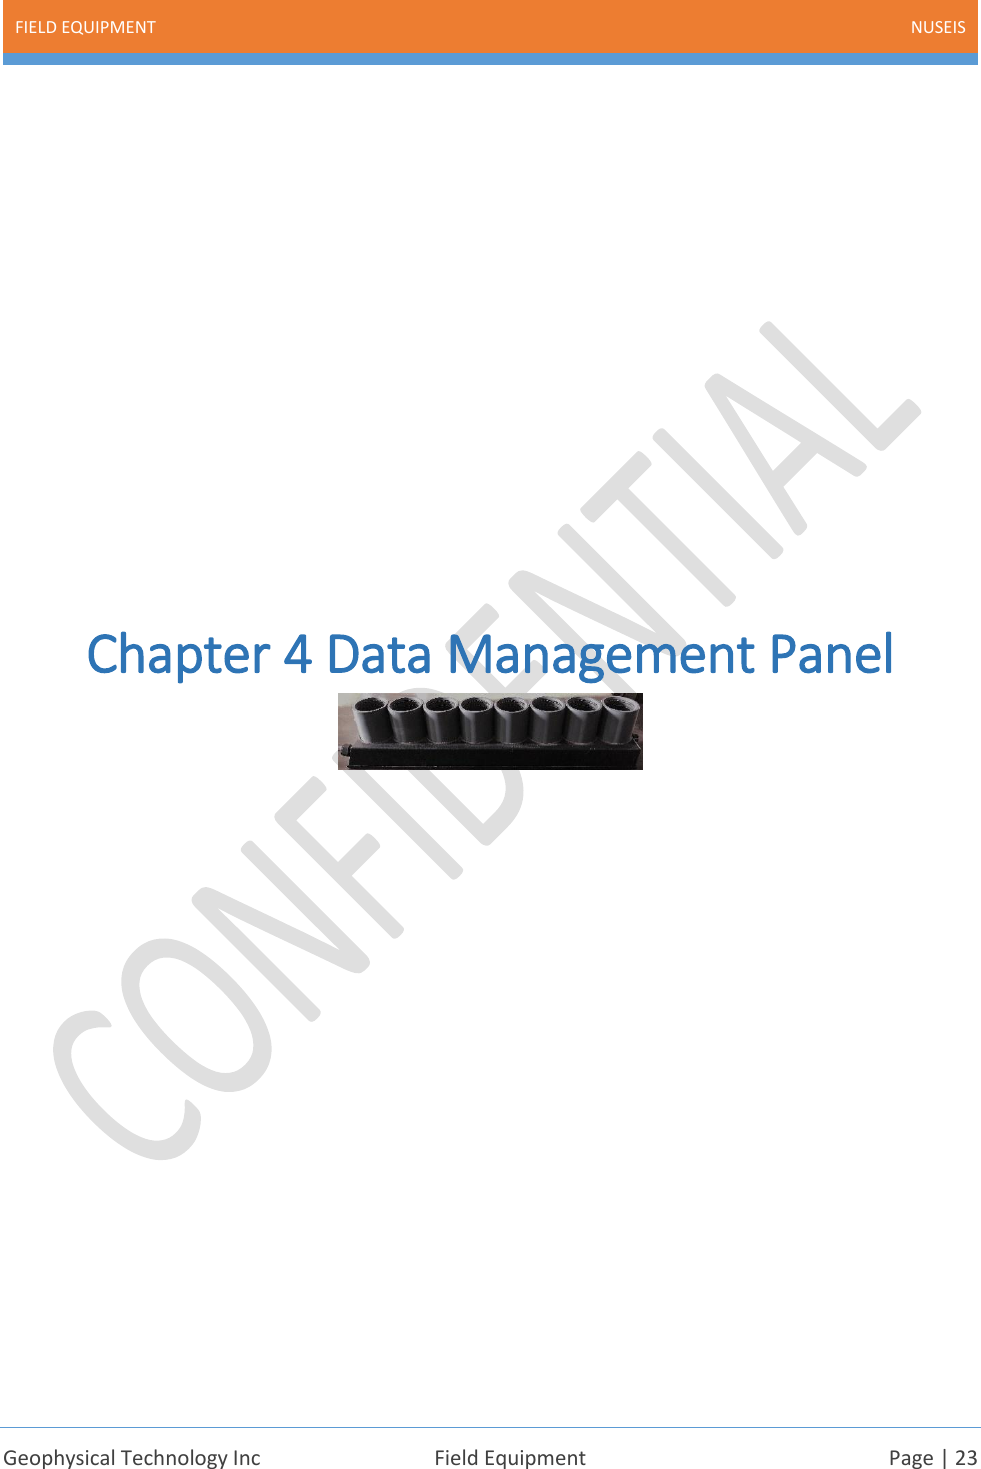 FIELD EQUIPMENT NUSEIS    Geophysical Technology Inc  Field Equipment  Page | 23             Chapter 4 Data Management Panel               